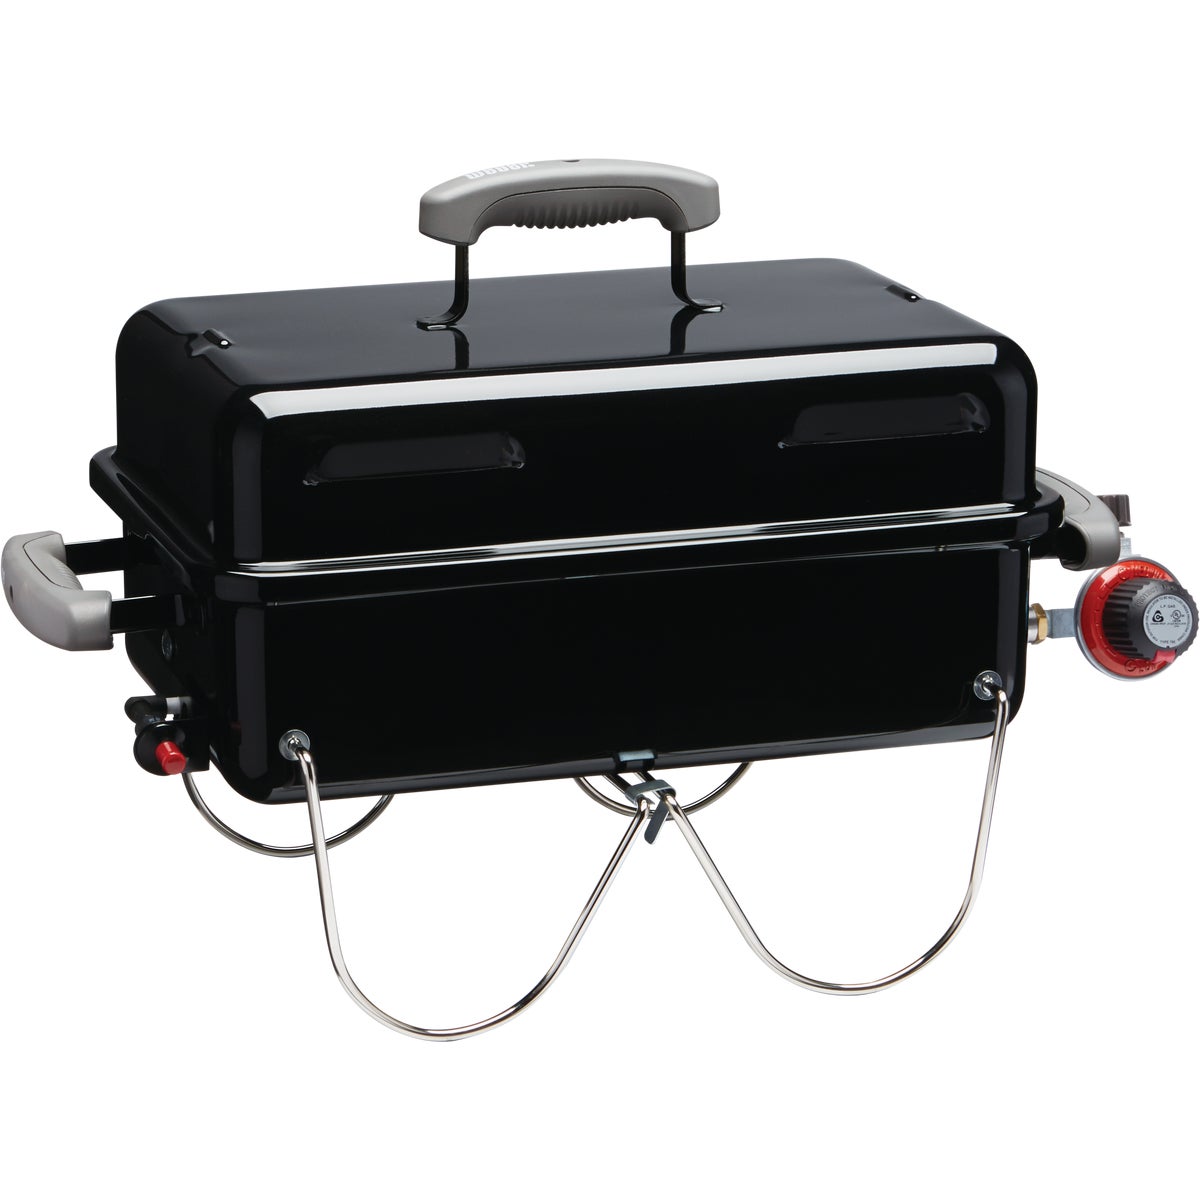 Item 808881, Enjoy the convenience of a gas grill while on the go.